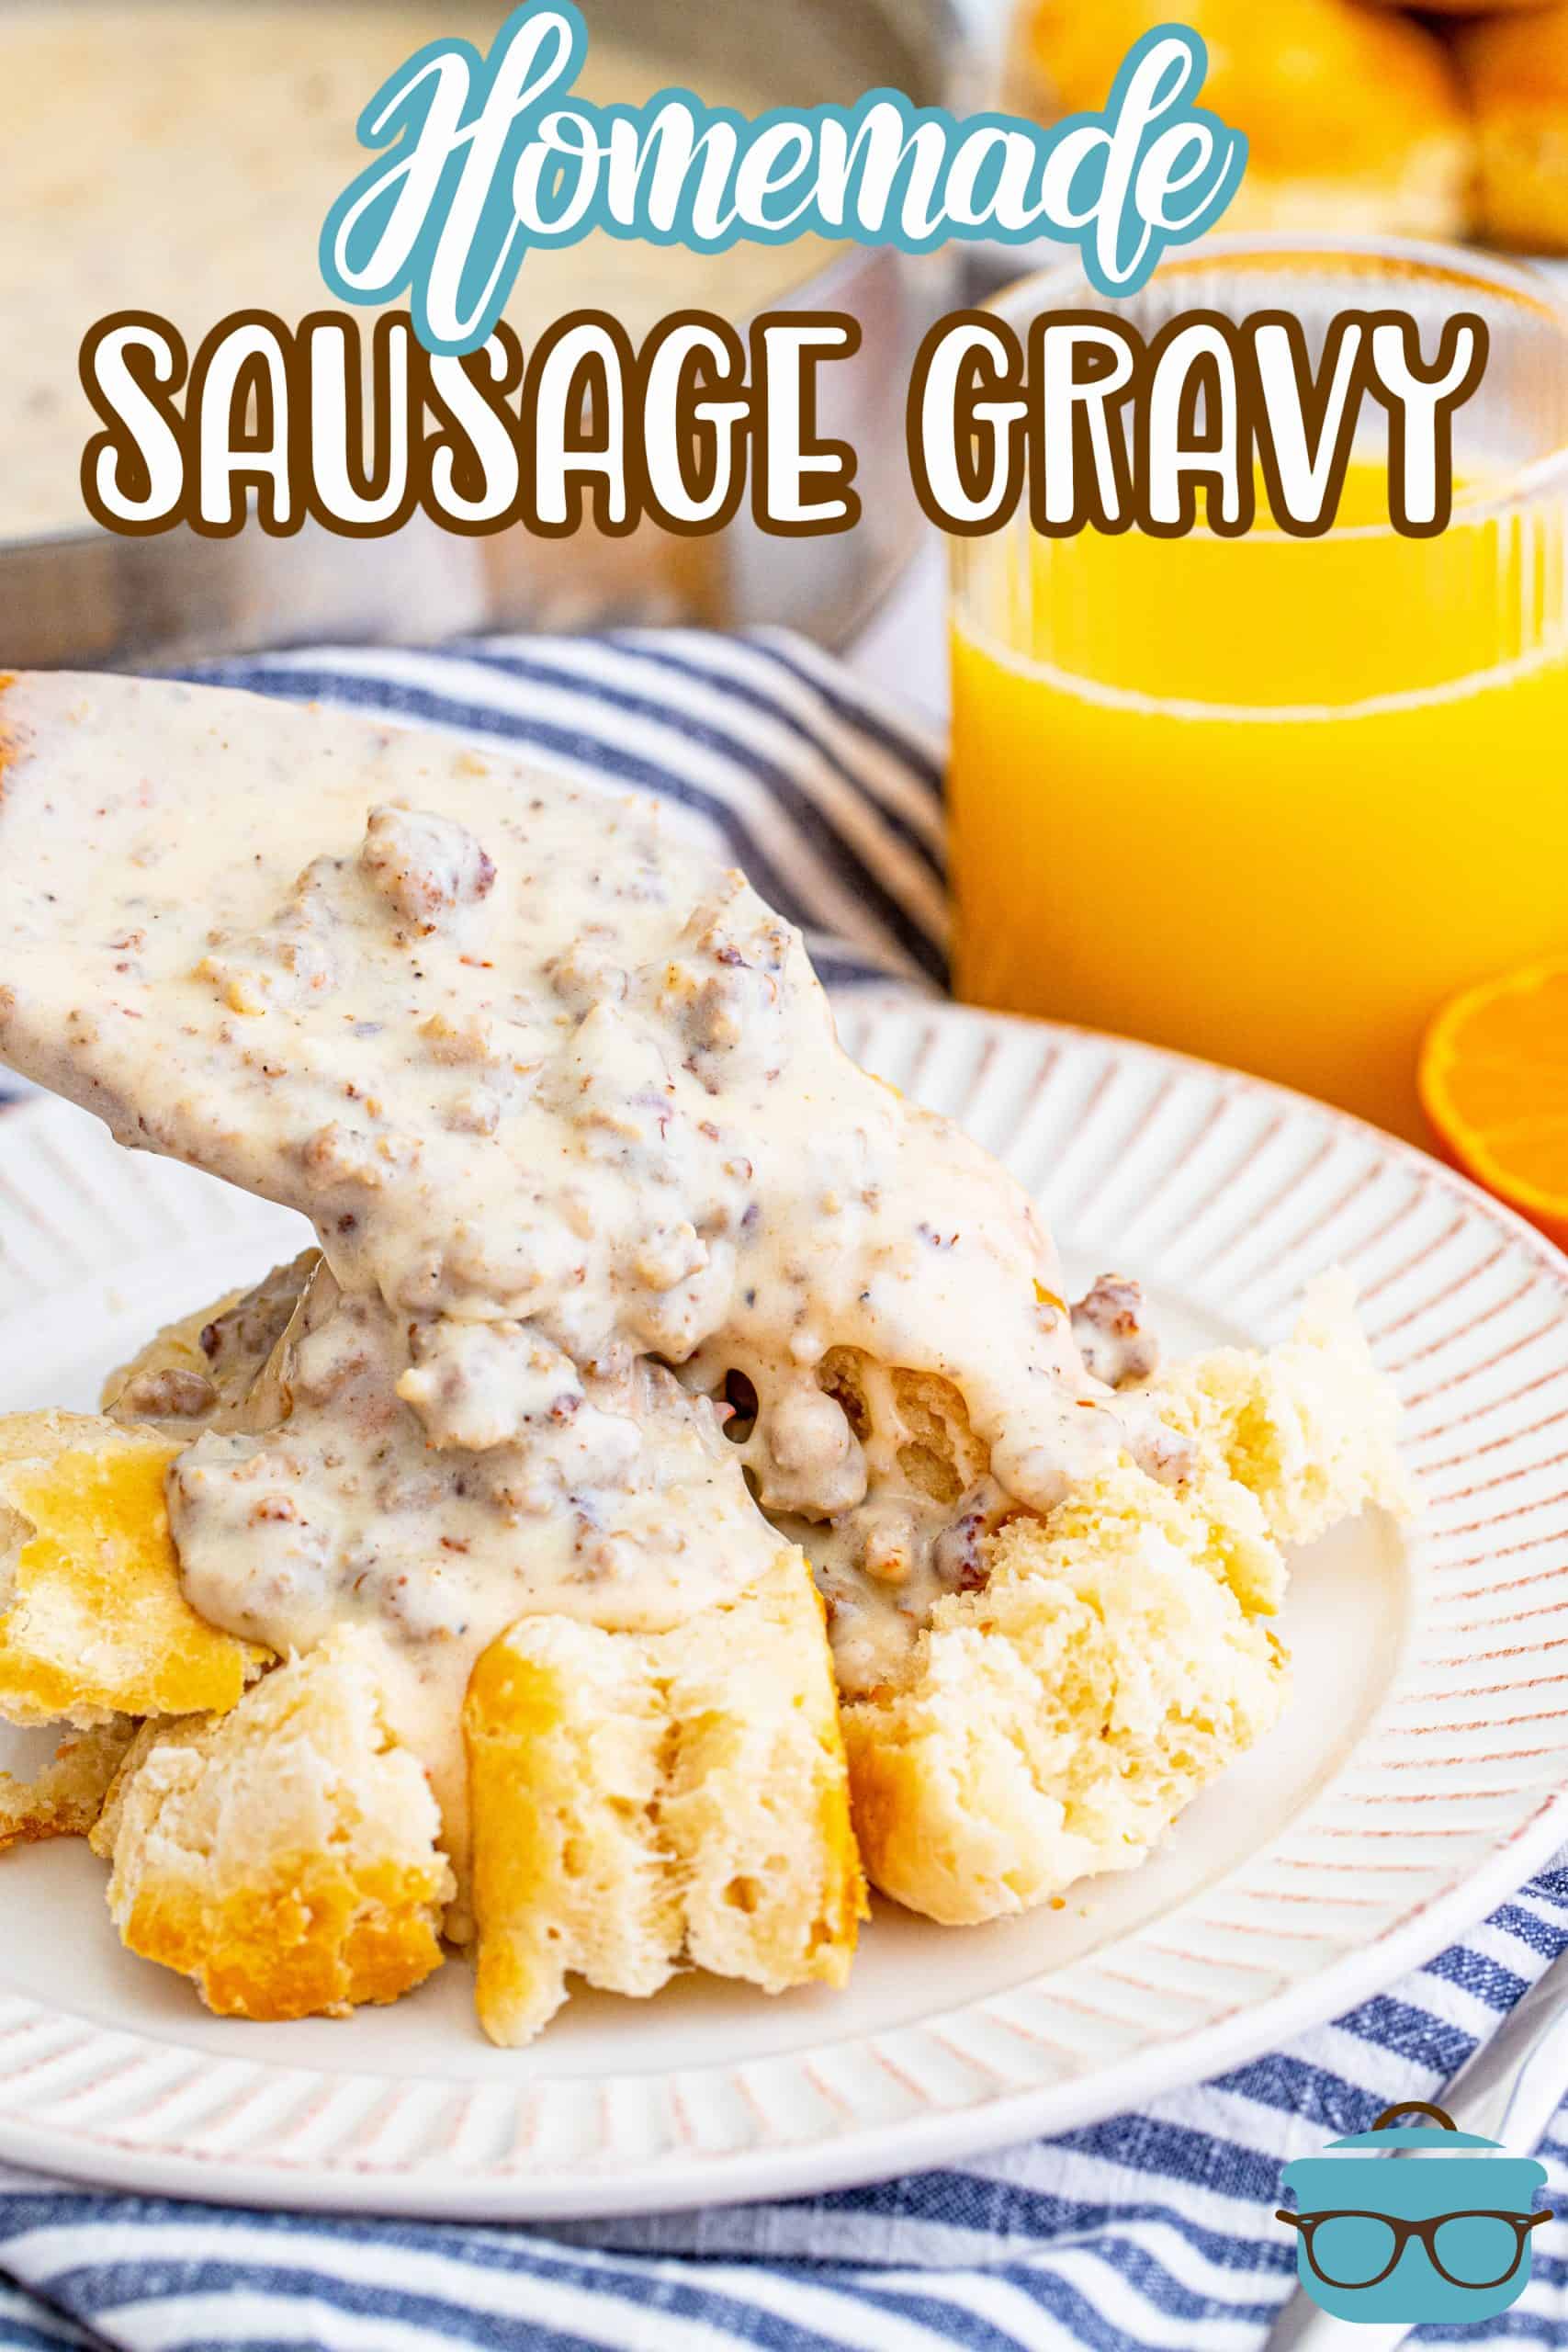 Homemade sausage gravy being spooned over biscuits with wooden spoon on white plate pinterest image.